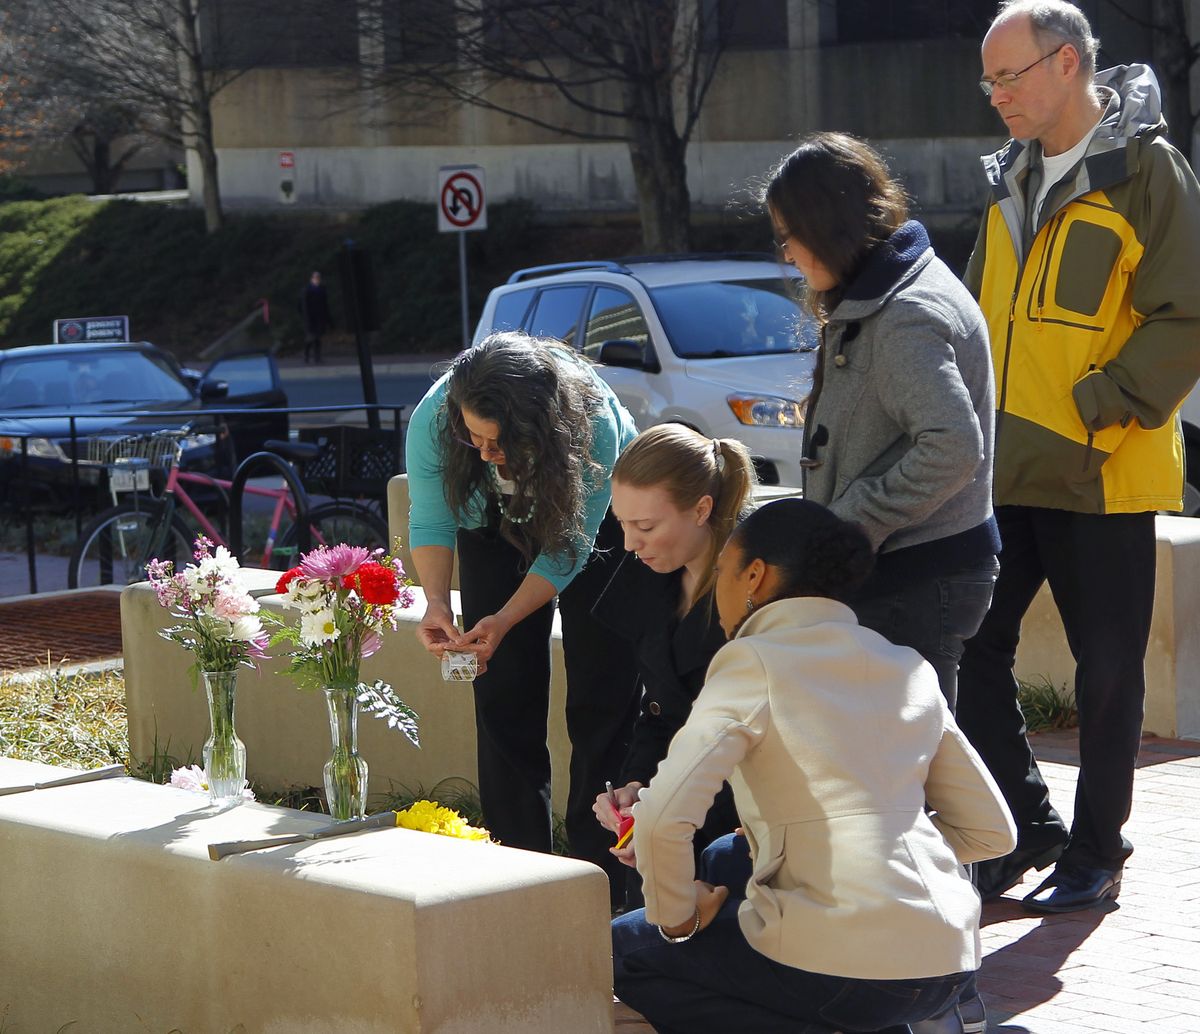 Mourners bring flowers to a makeshift memorial Wednesday outside the University of North Carolina School of Dentistry in Chapel Hill. (Associated Press)